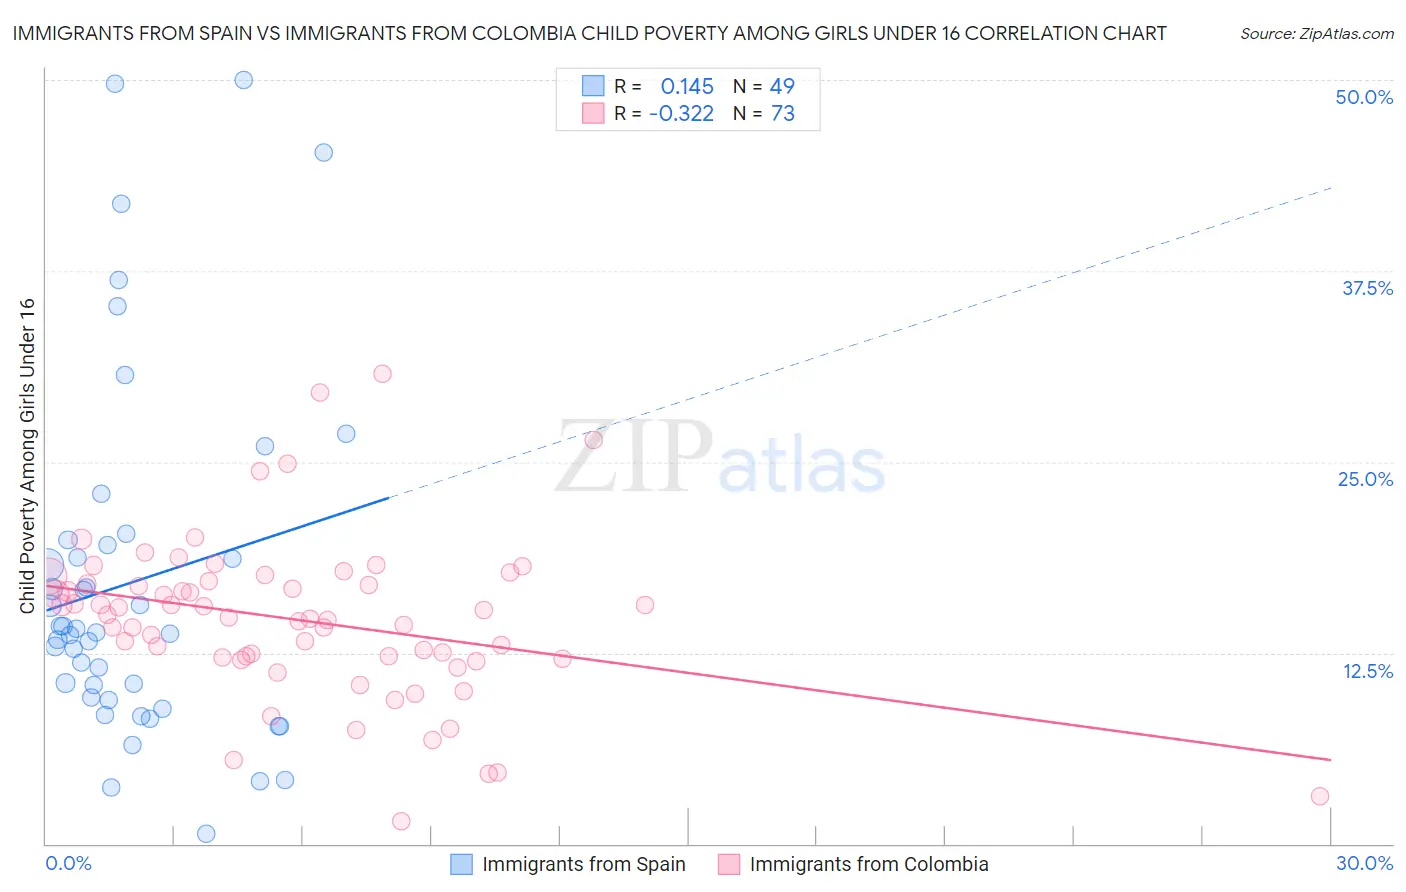 Immigrants from Spain vs Immigrants from Colombia Child Poverty Among Girls Under 16